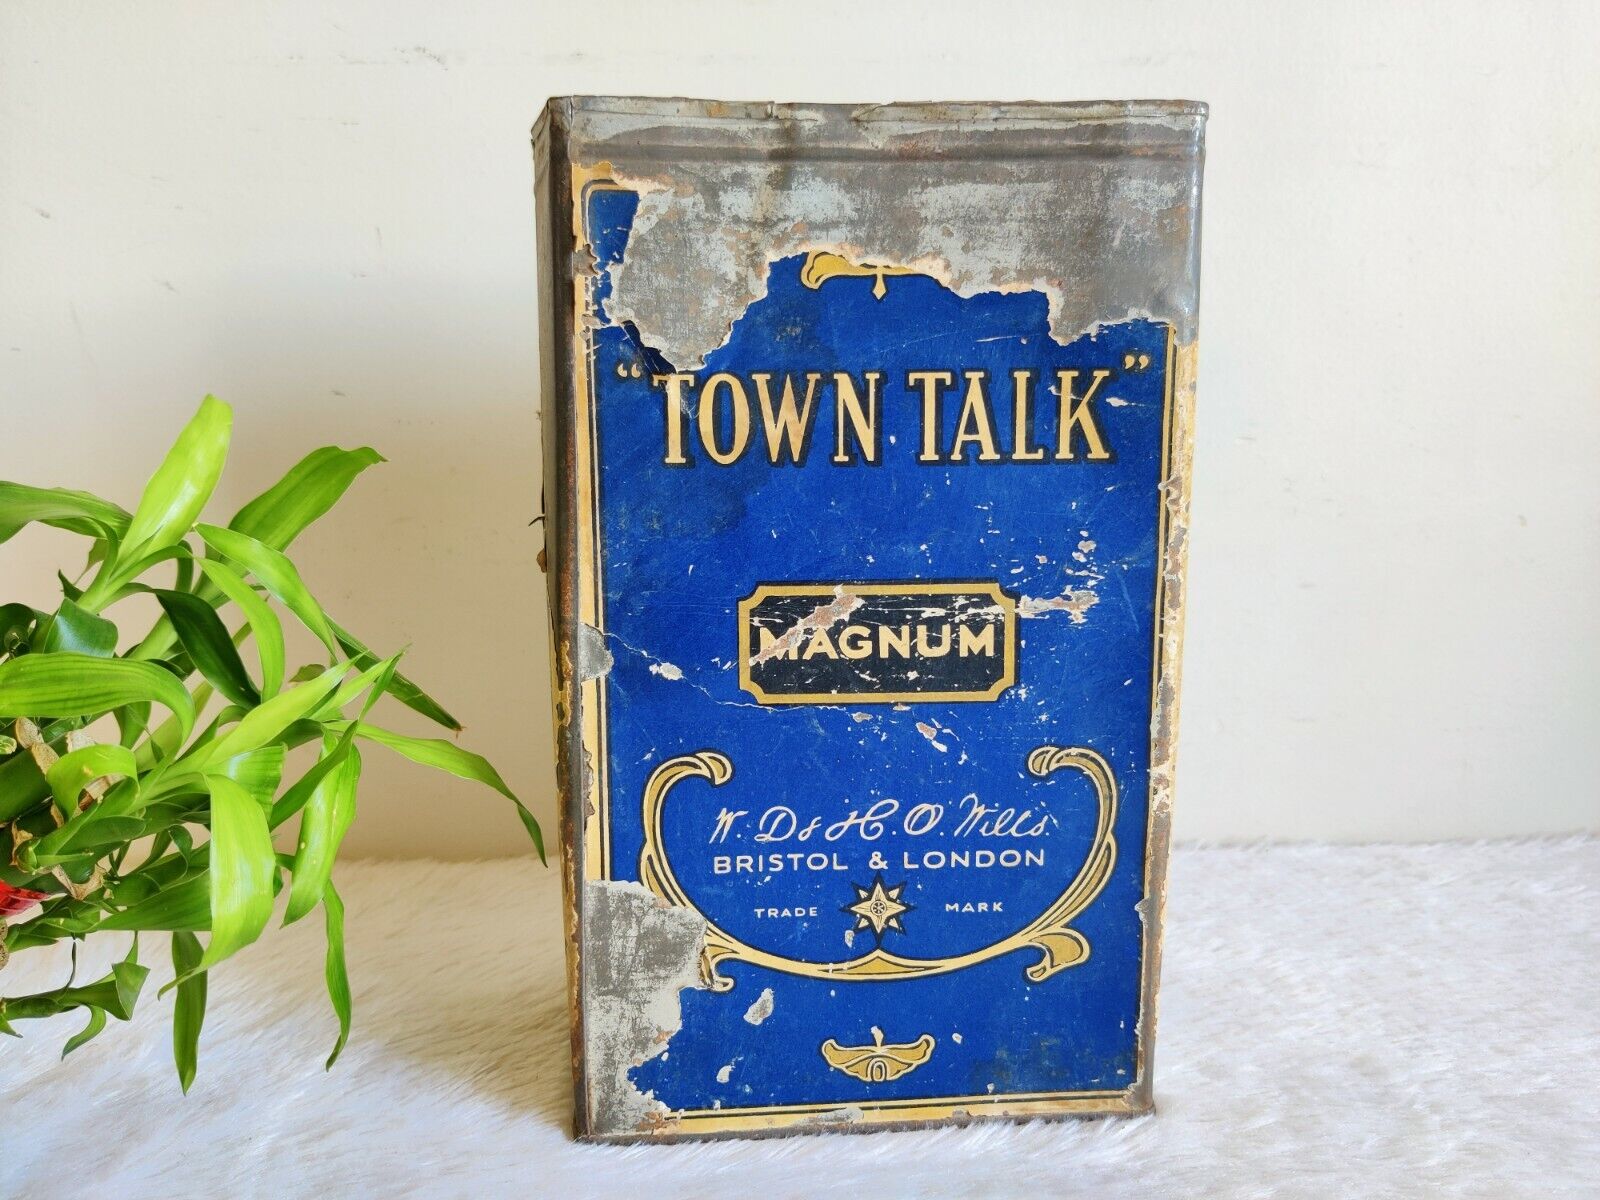 1920s Vintage Wd Ho Wills Town Talk Magnum Cigarette Advertising Tin Box TB1621